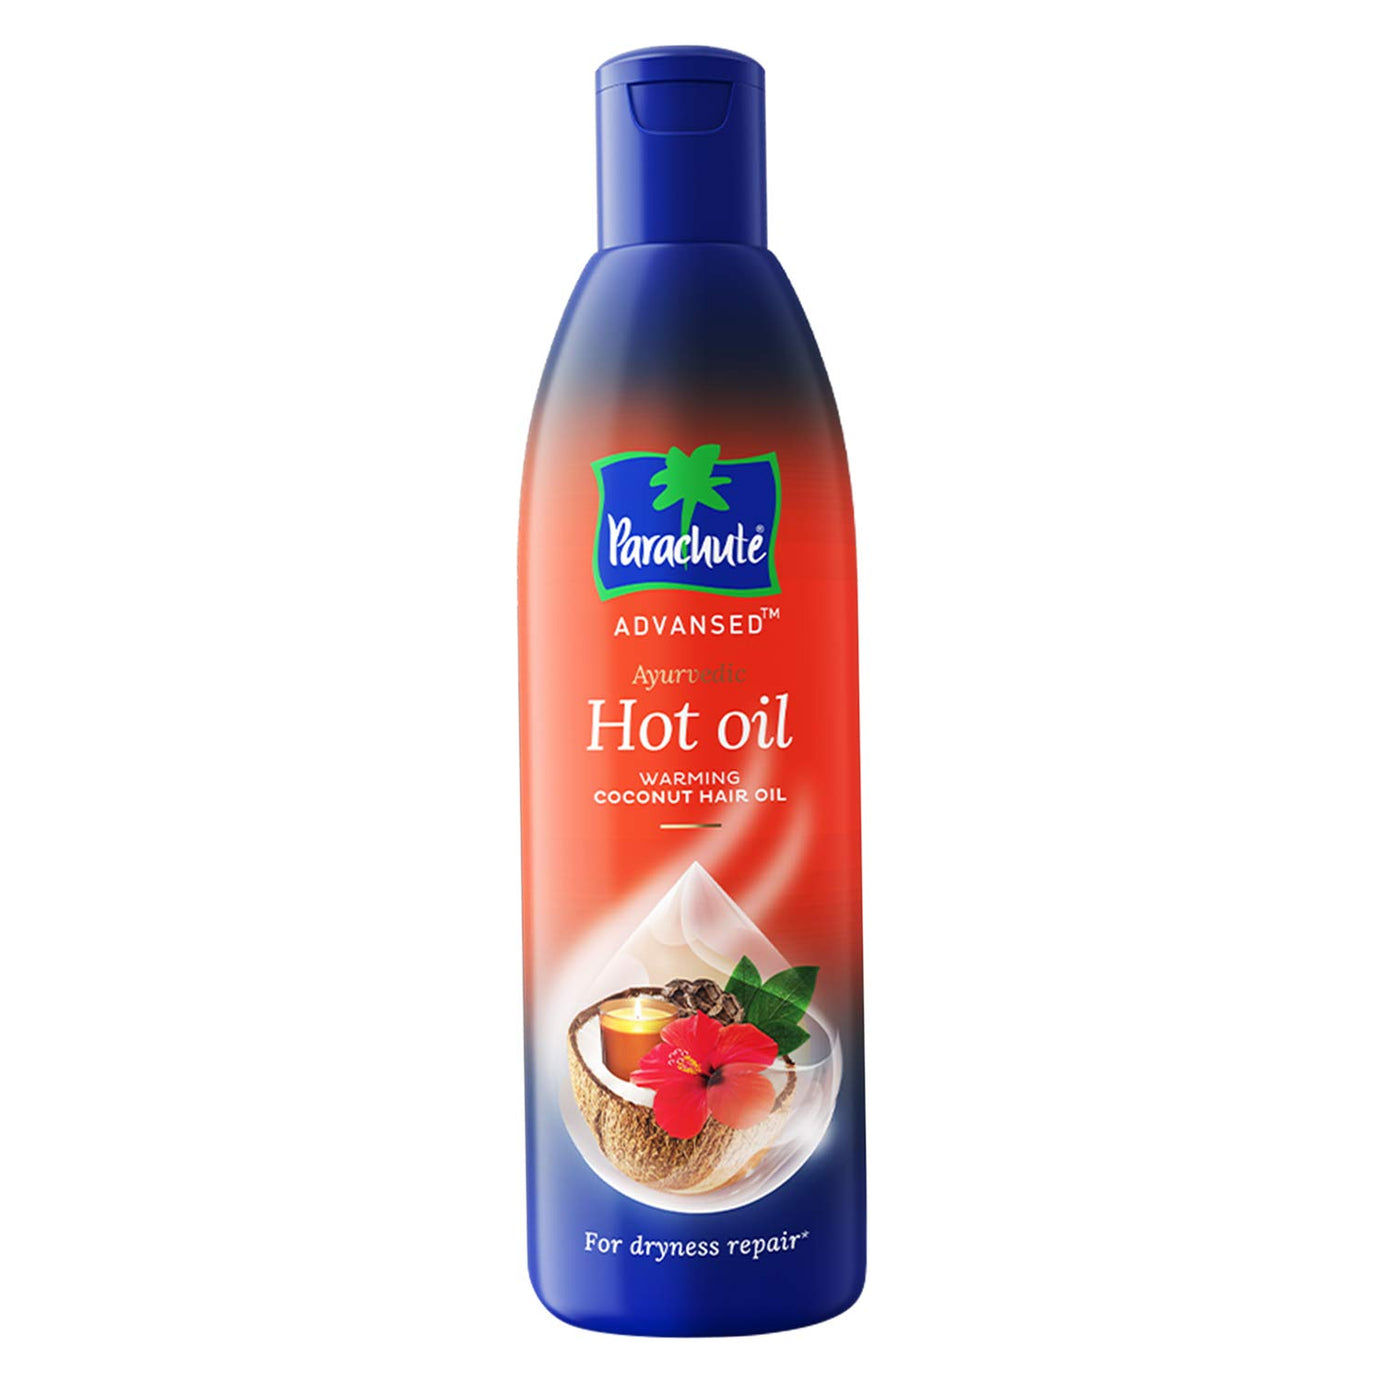 Shop Parachute Advansed Ayurvedic Hot Oil 190ml at price 110.00 from Parachute Online - Ayush Care